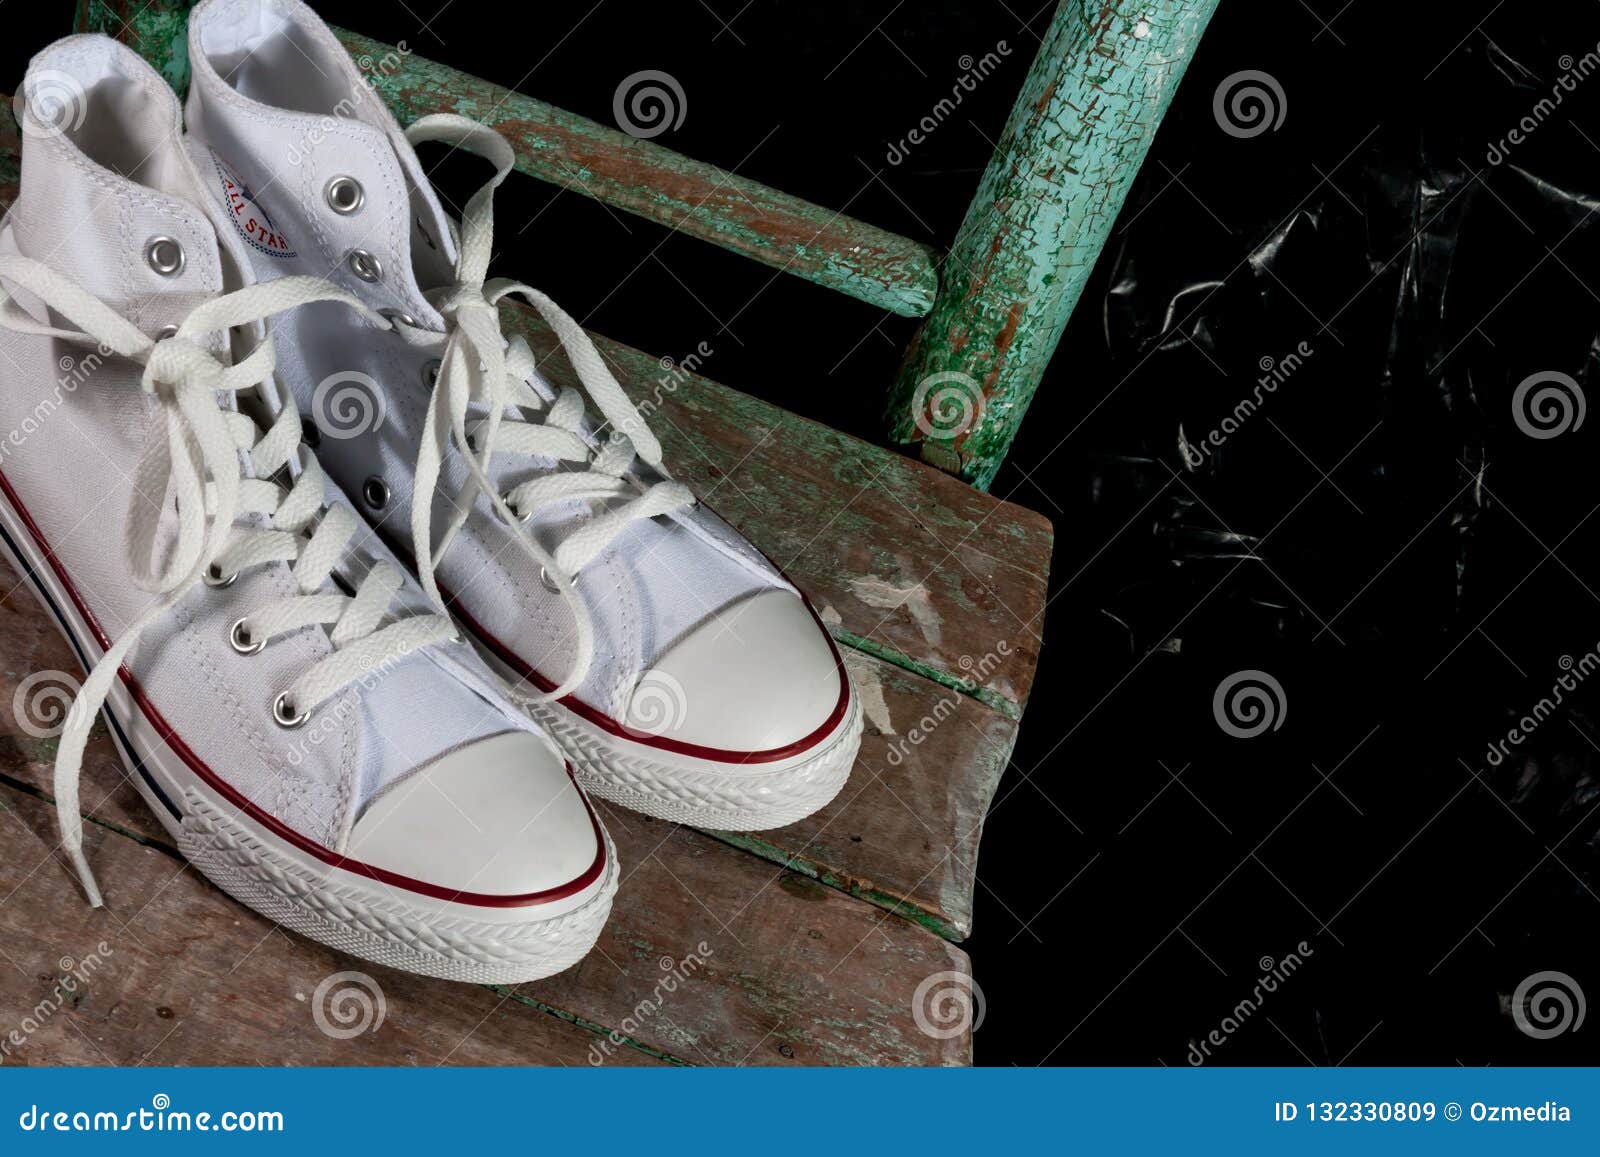 White Converse Sneakers on Green Chair Editorial Stock Image - Image of ...